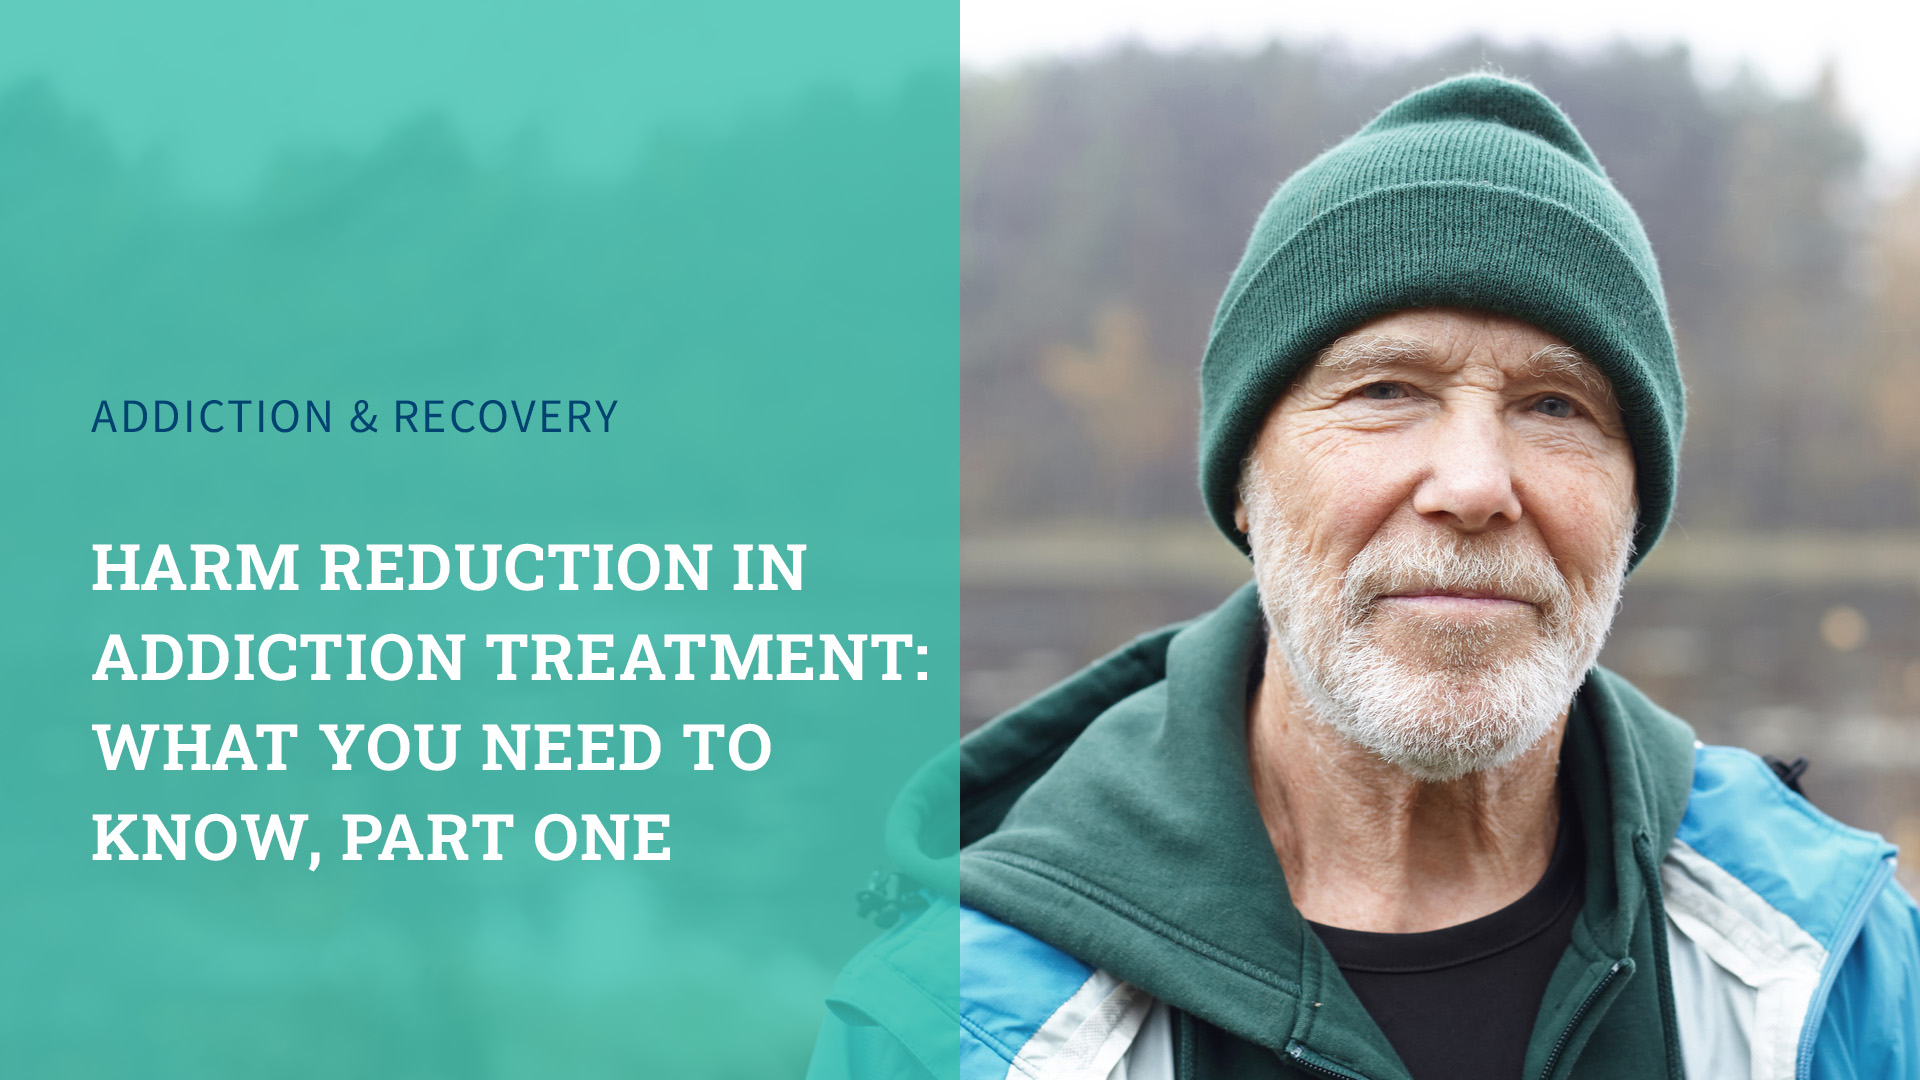 Harm Reduction in Addiction Treatment: What You Need to Know, Part One